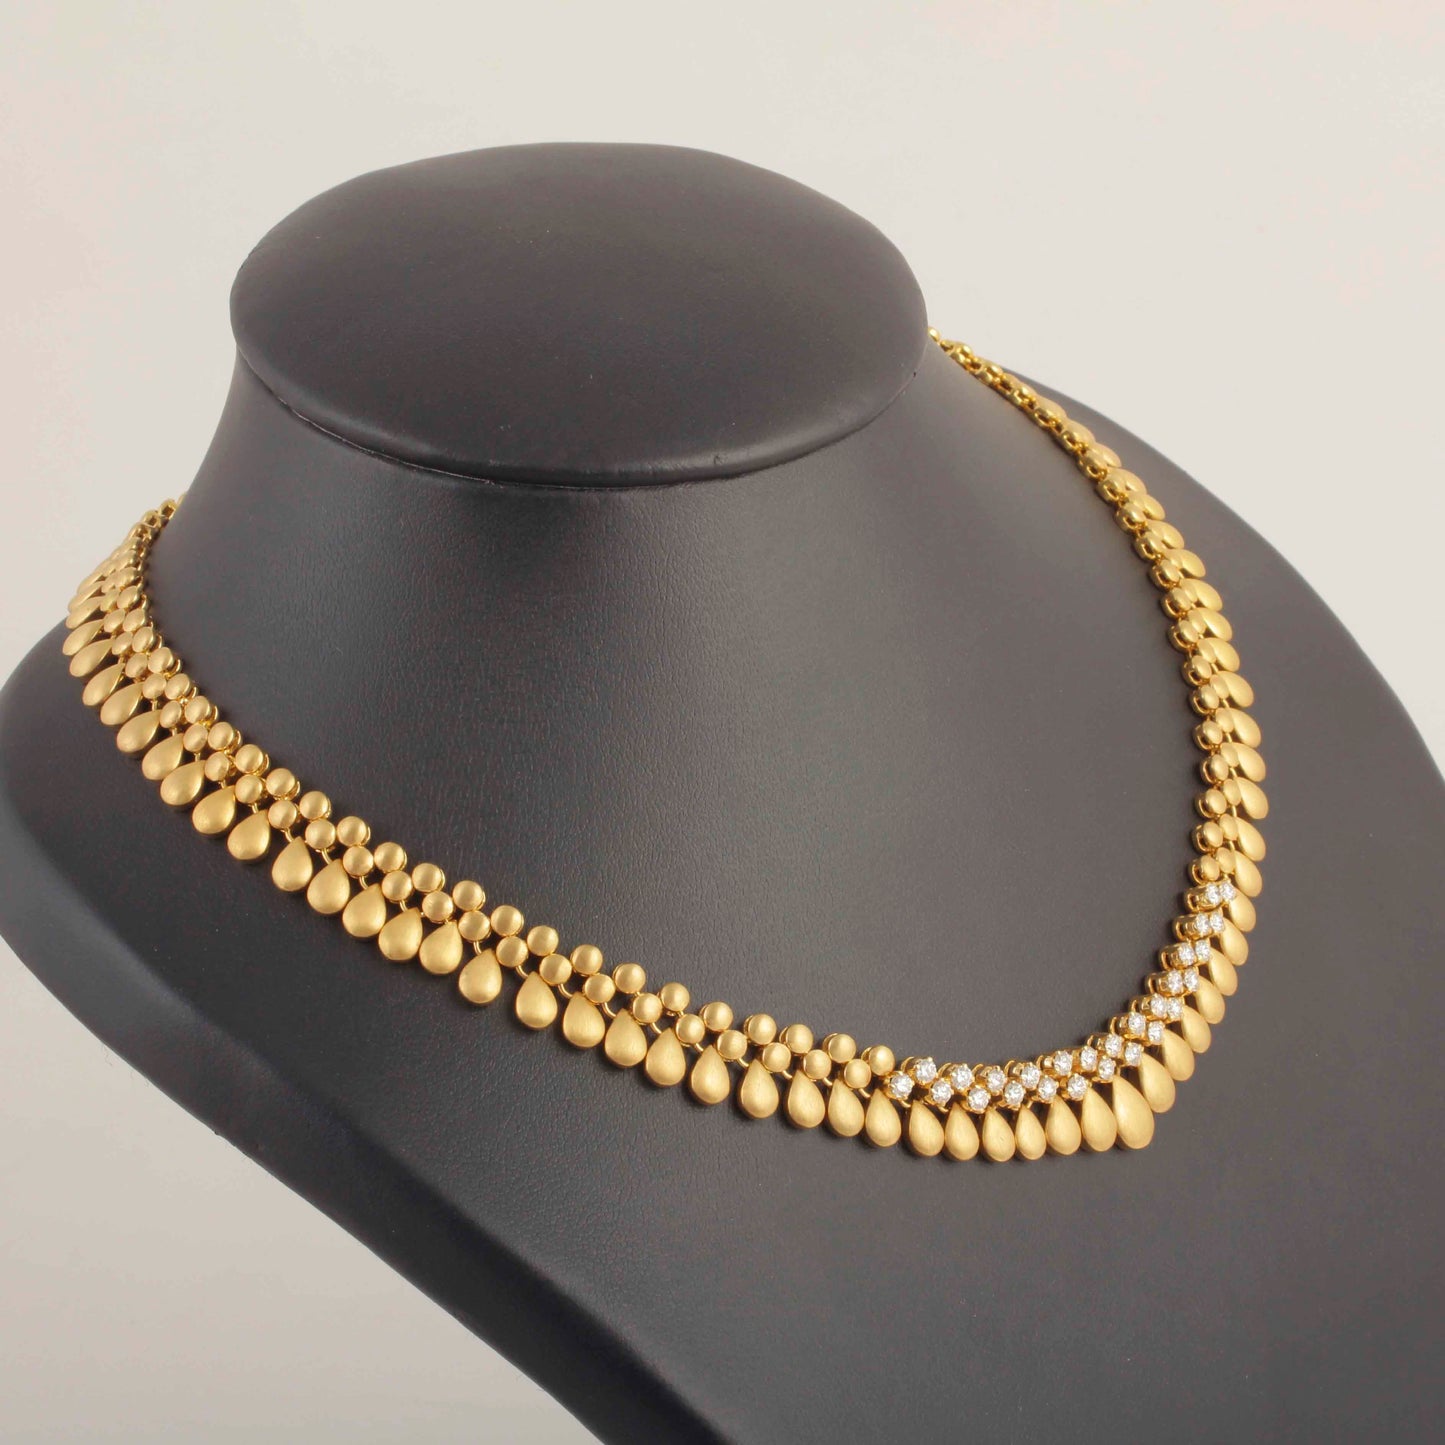 The Athulya Gold and Diamond Necklace by Rasvihar